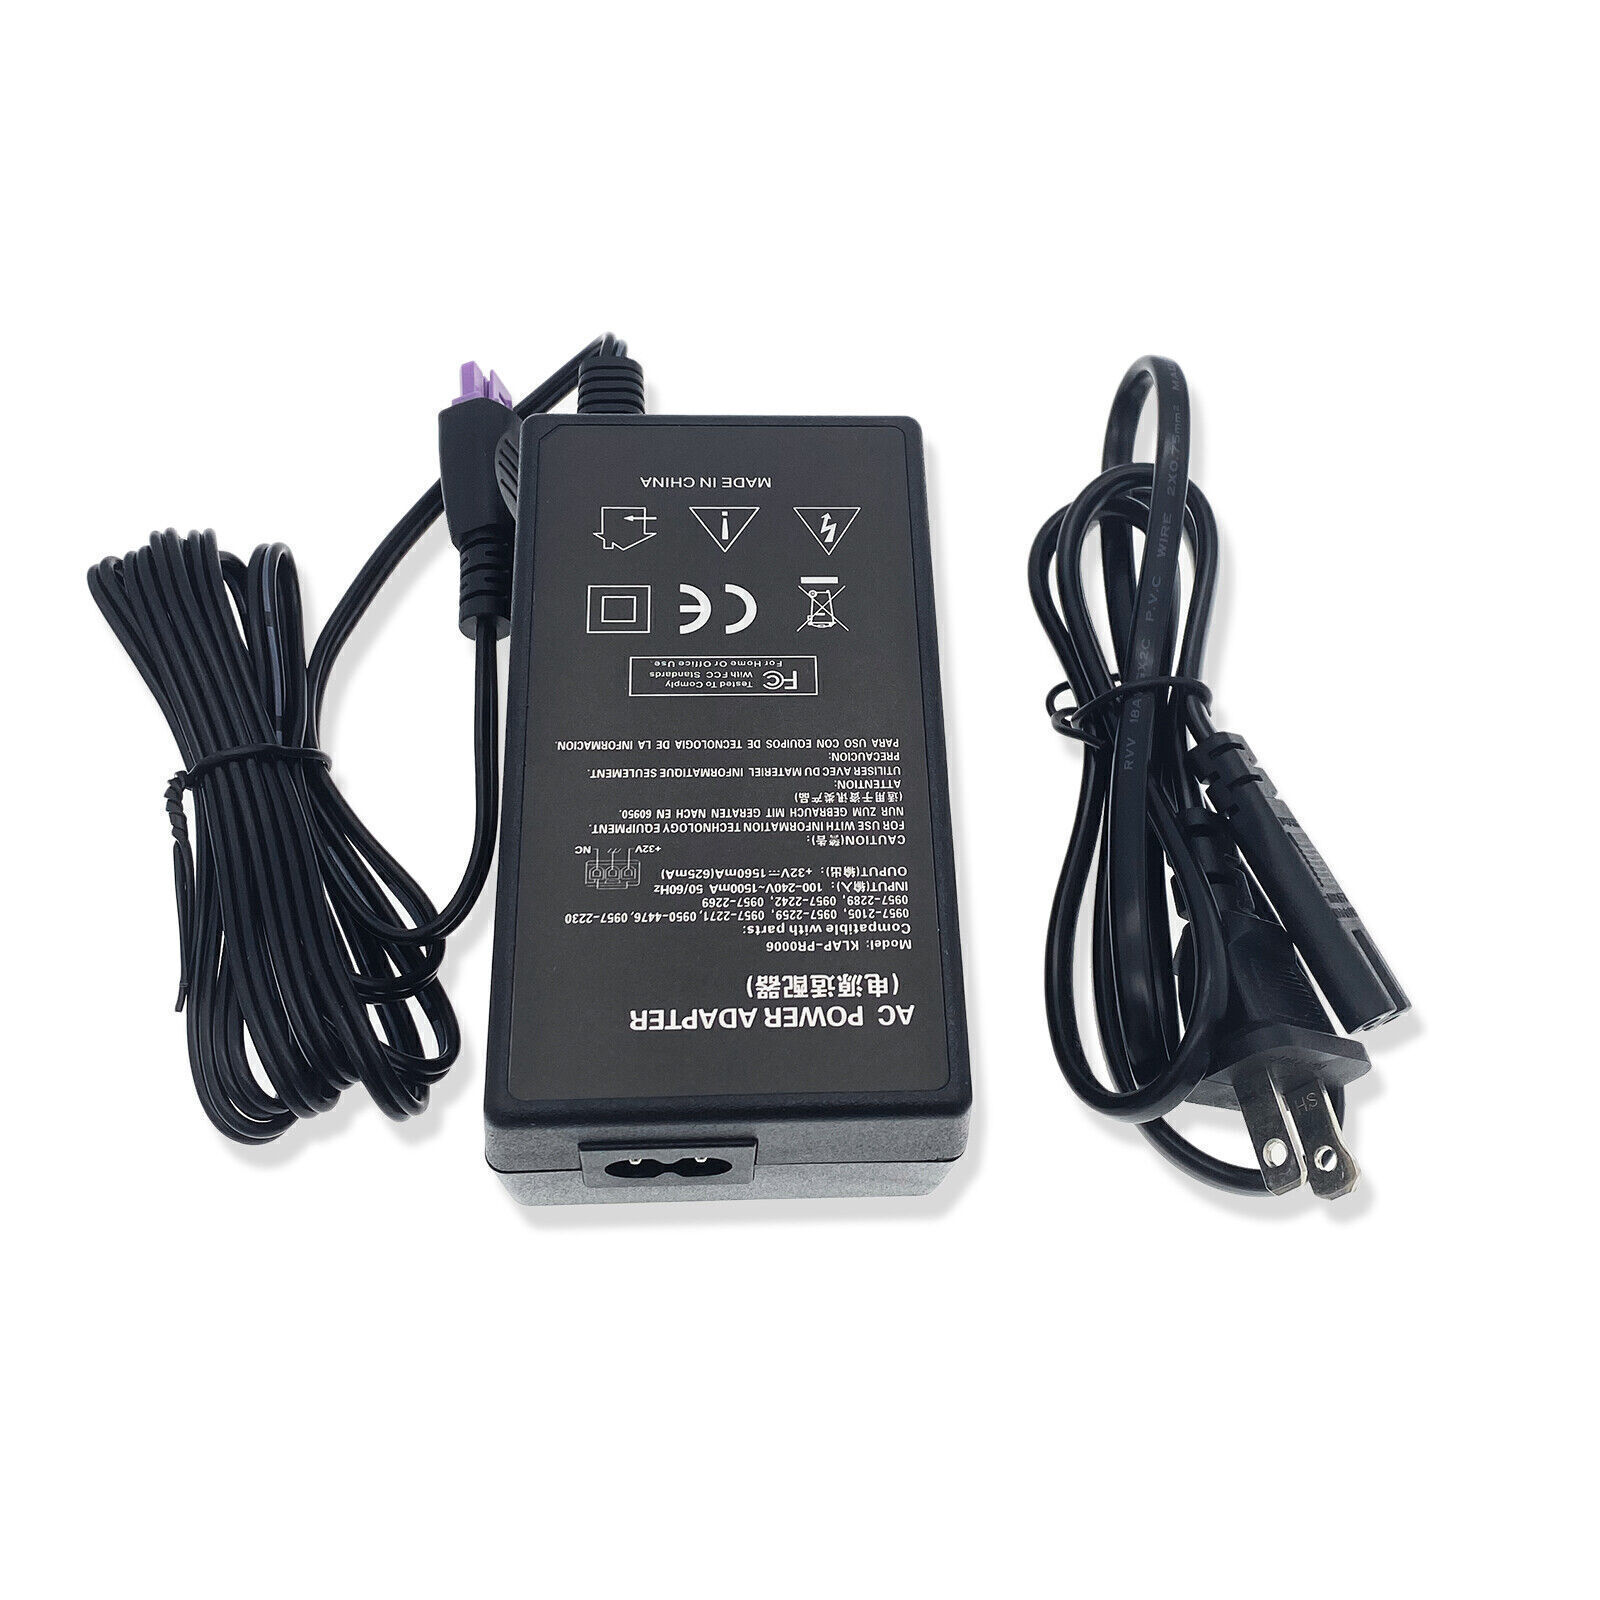 AC DC Adapter Charger for HP Photosmart All-in-One C6100 and C6200 Series w/Cord